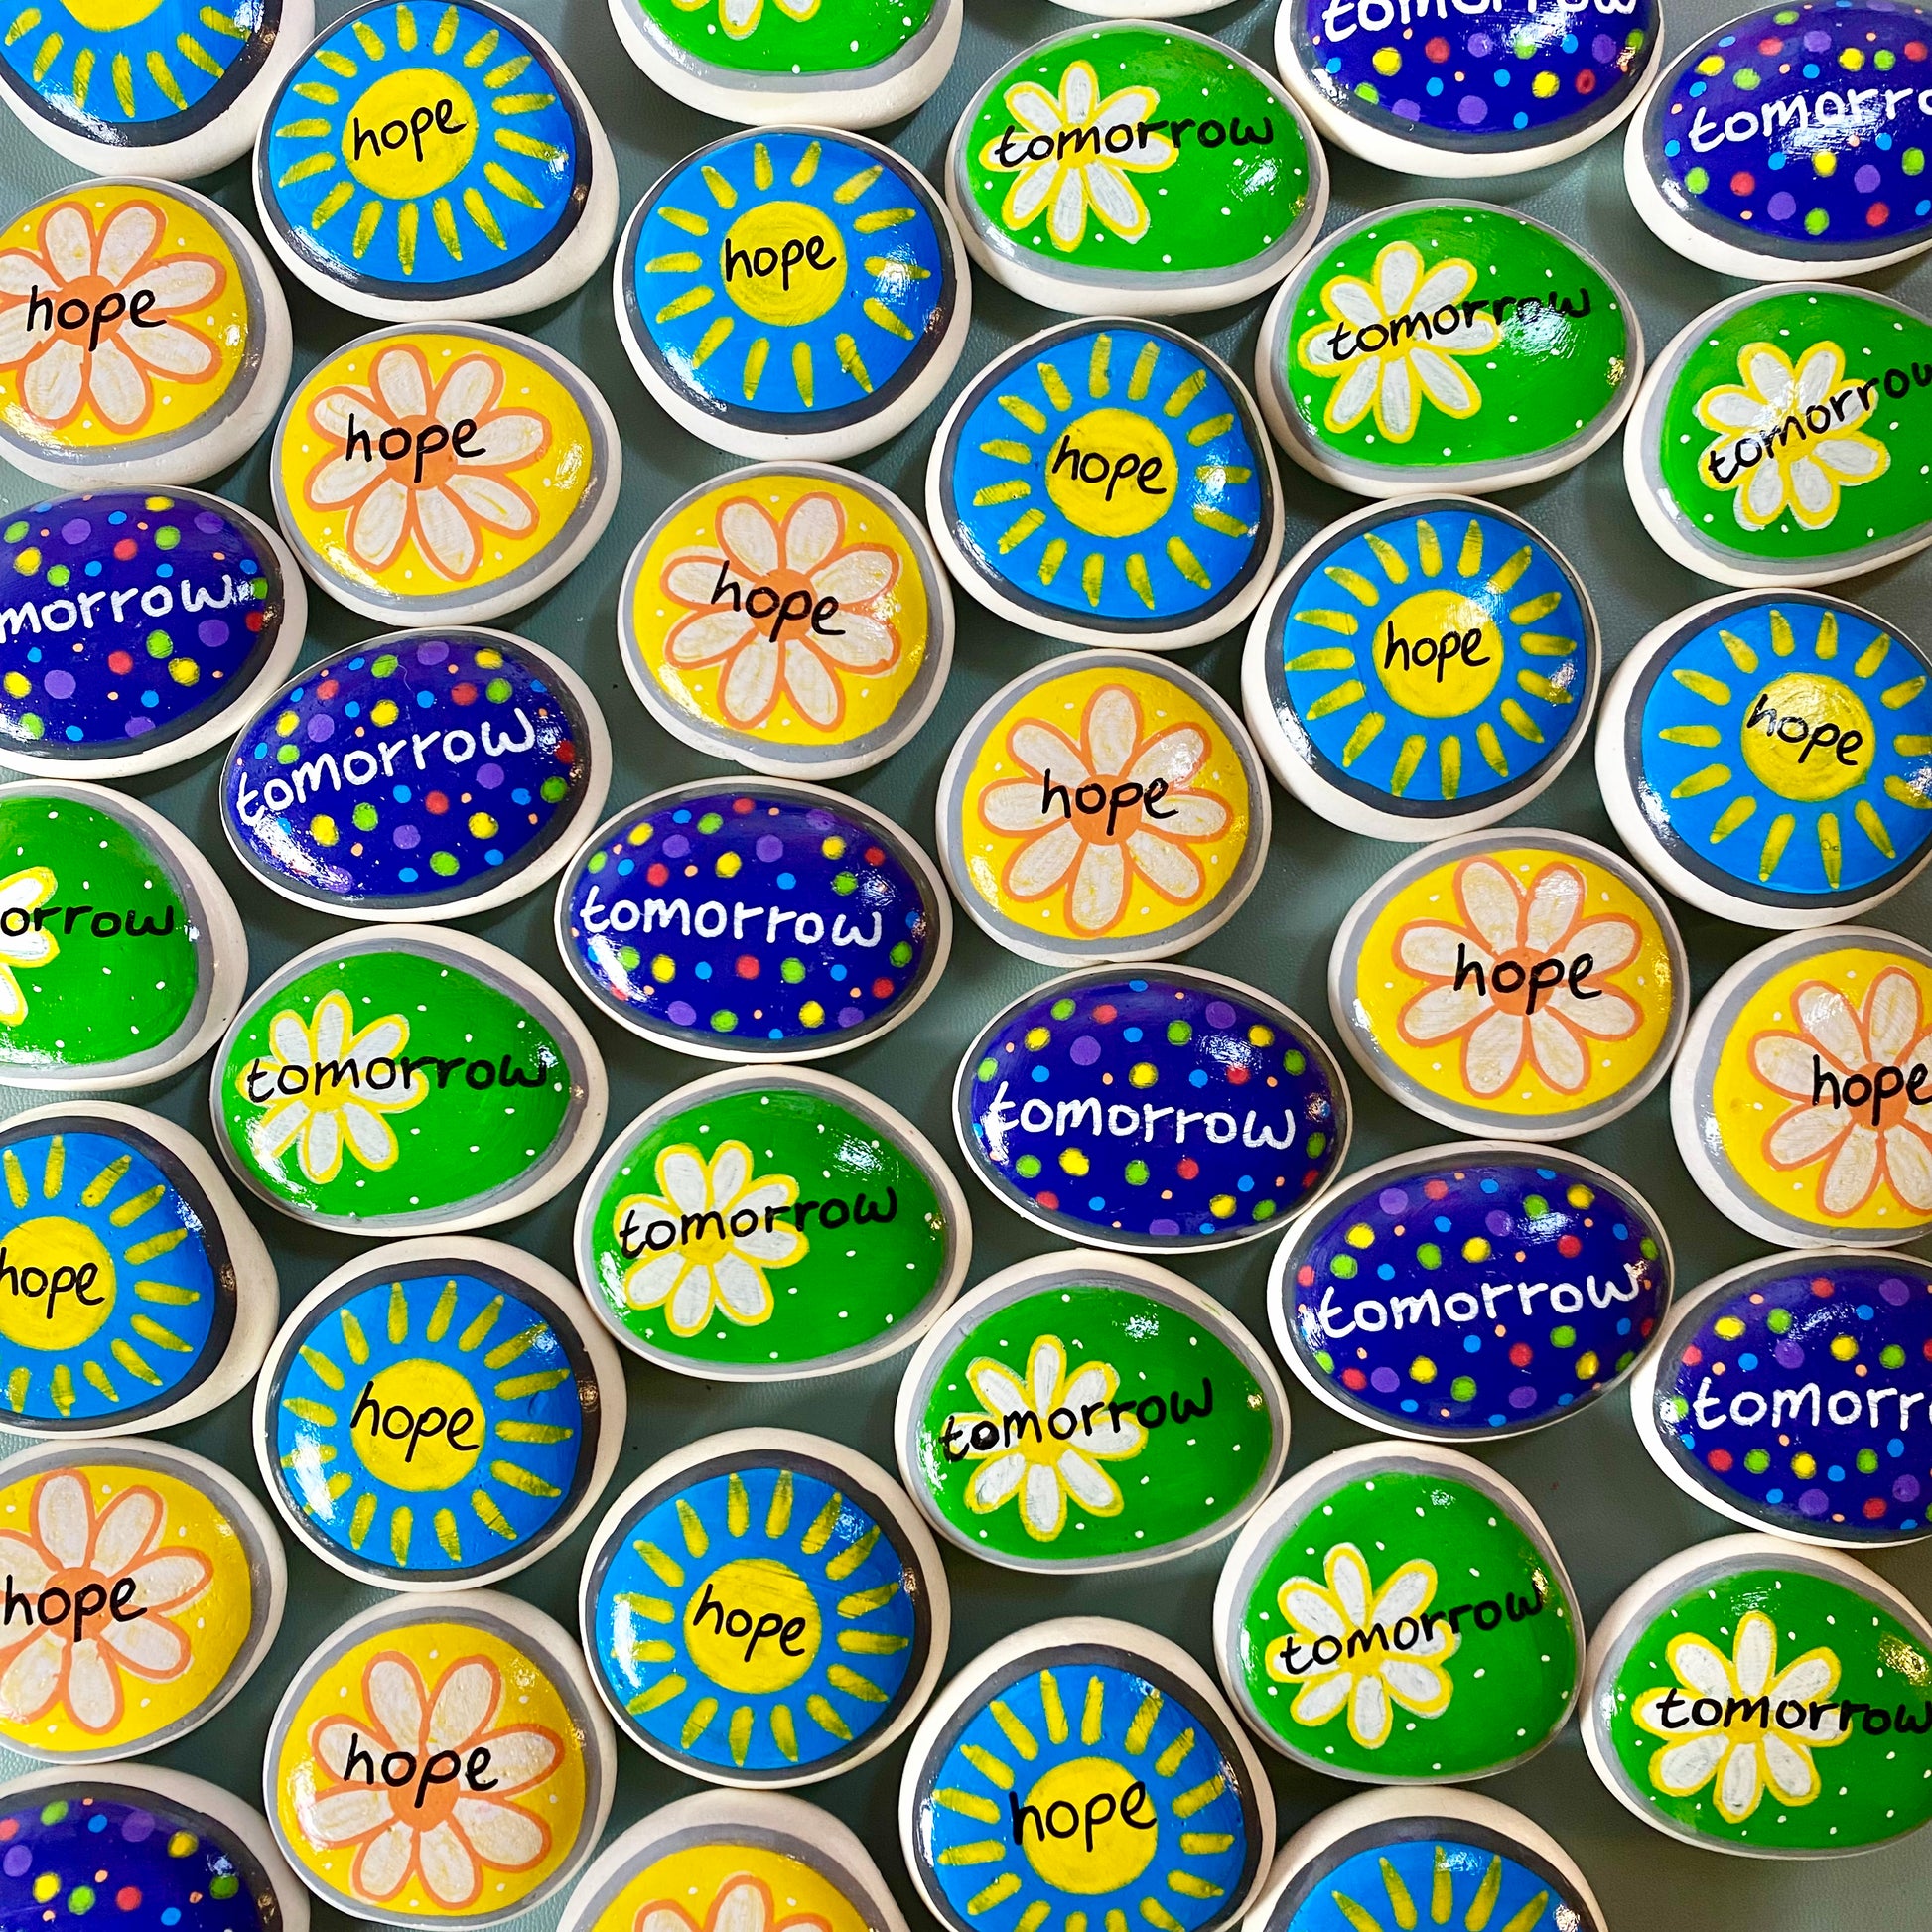 Lots of Yellow, Green, and Blue Hand painted pebbles with the words Hope and Tomorrow written on